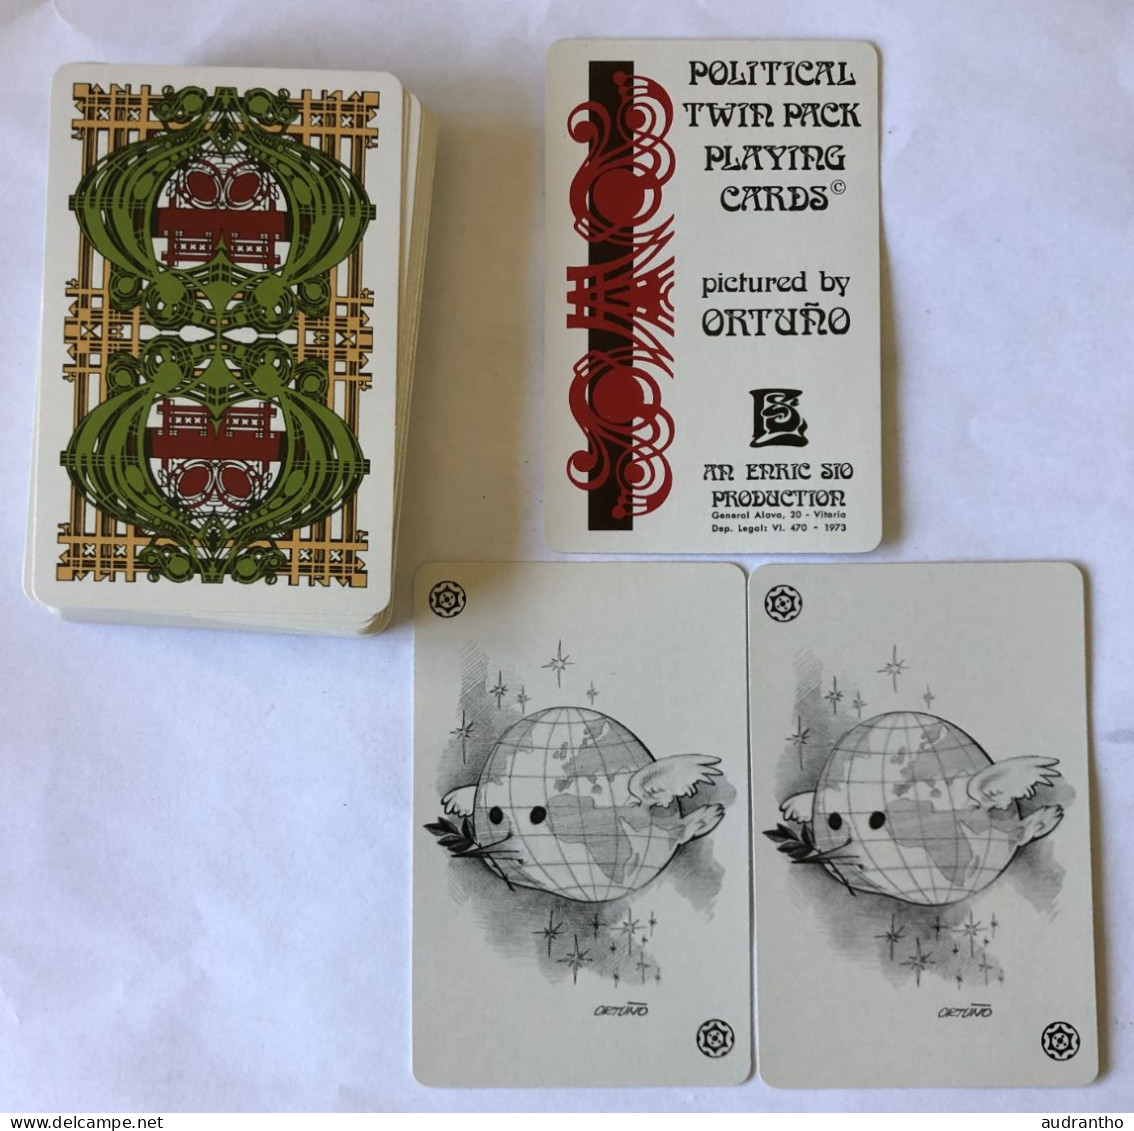 Très Beau Double Jeu 54 Cartes 1973 - Caricature Personnalité - Political Twin Pack Playing Cards By ORTUNO - Erric Sio - 54 Cartes